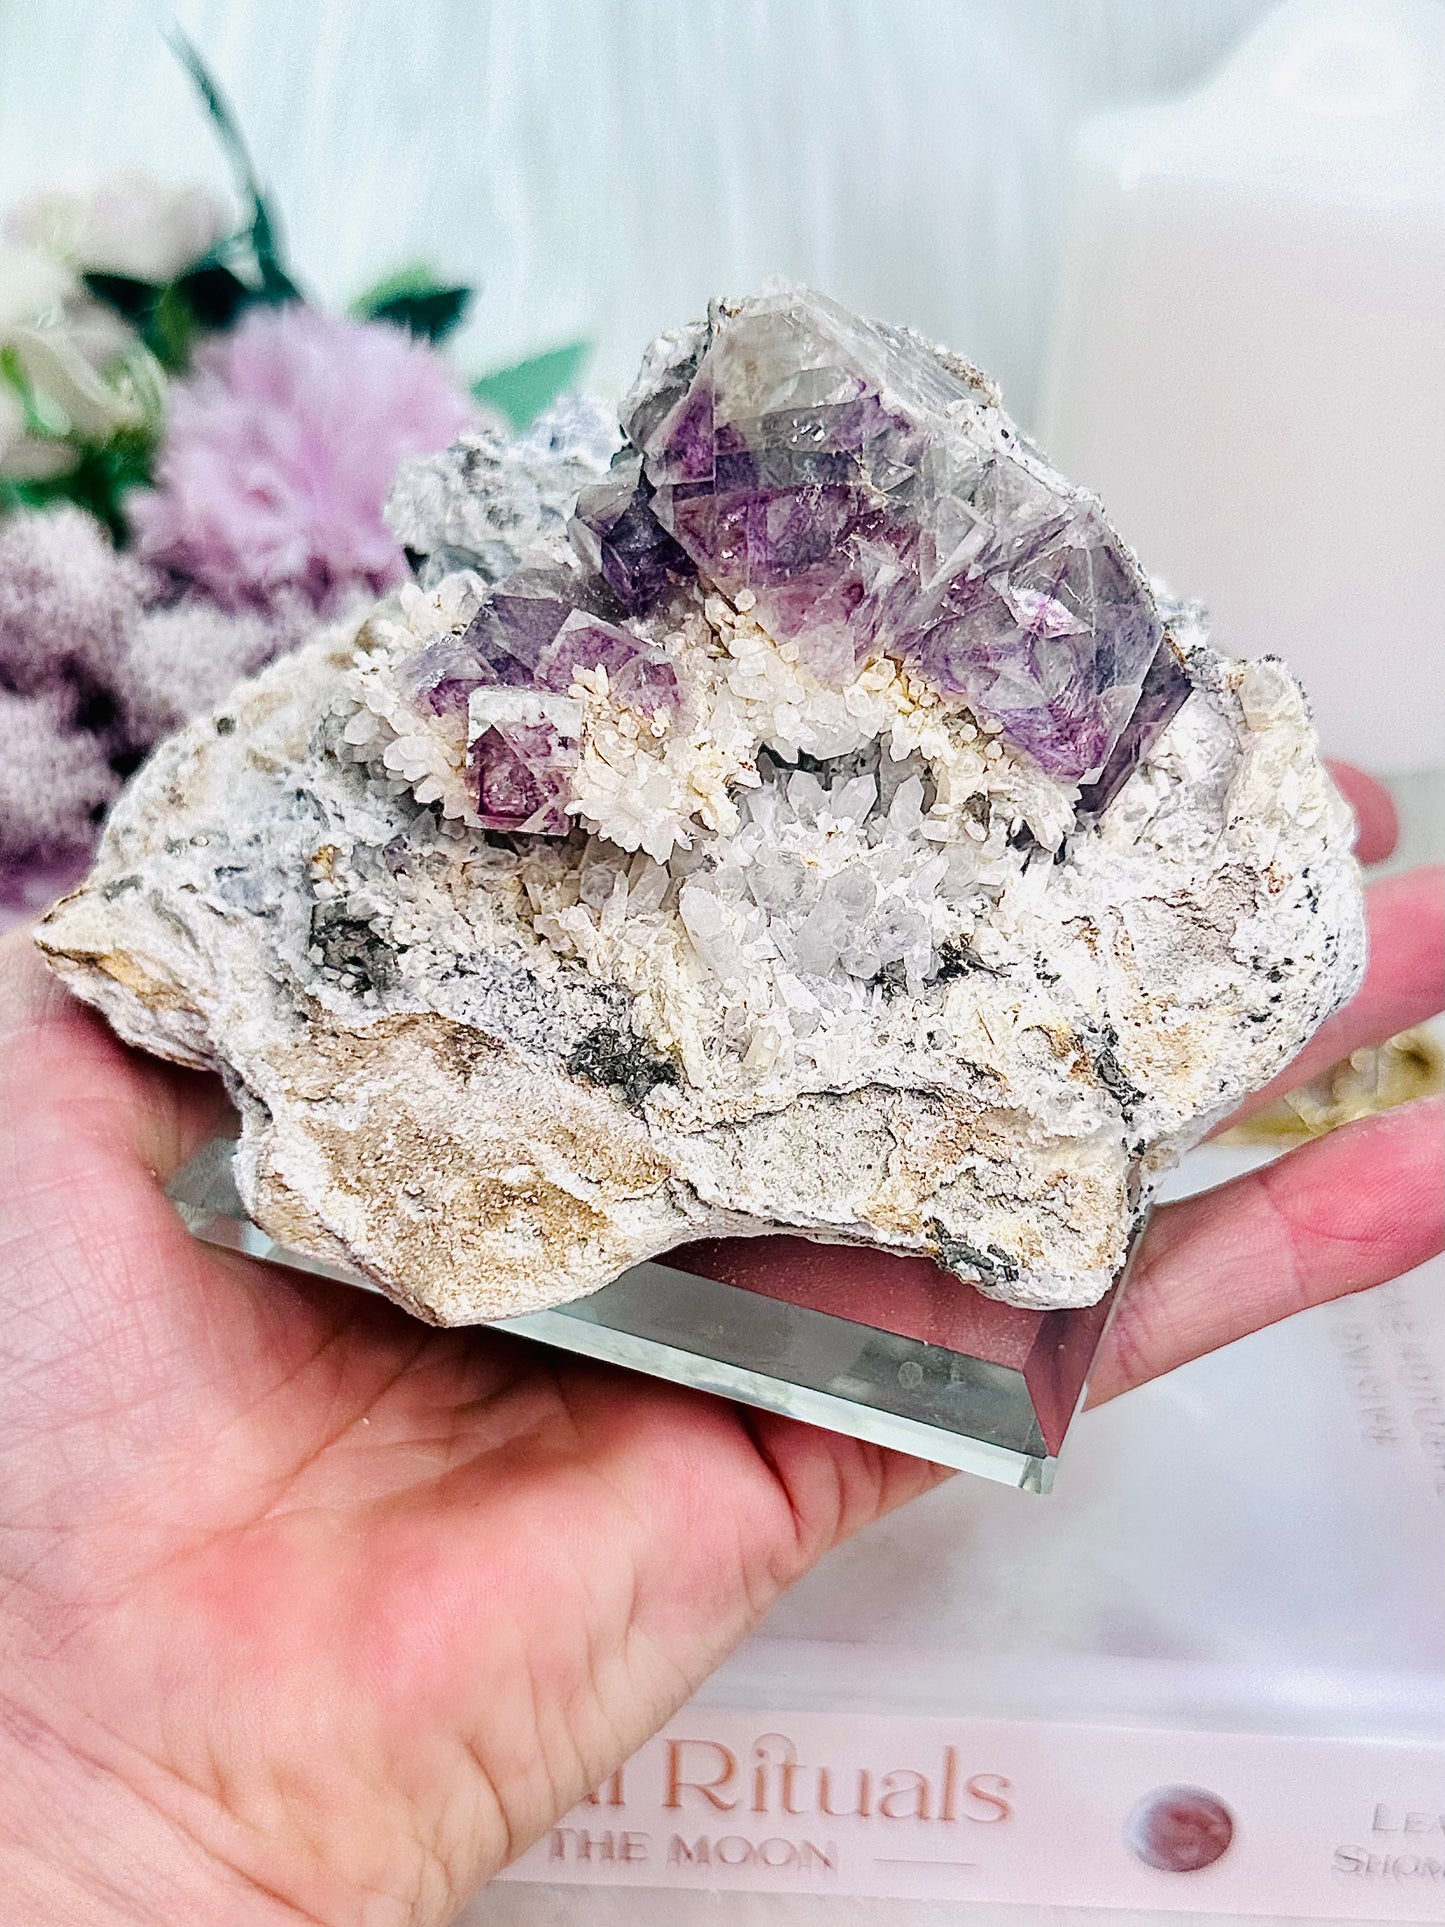 ✨ A Collectors Piece ✨ Classy & Fabulous Natural Cubed Fluorite On Matrix Specimen From Mexico 703grams ~ Specimen is on Glass Stand